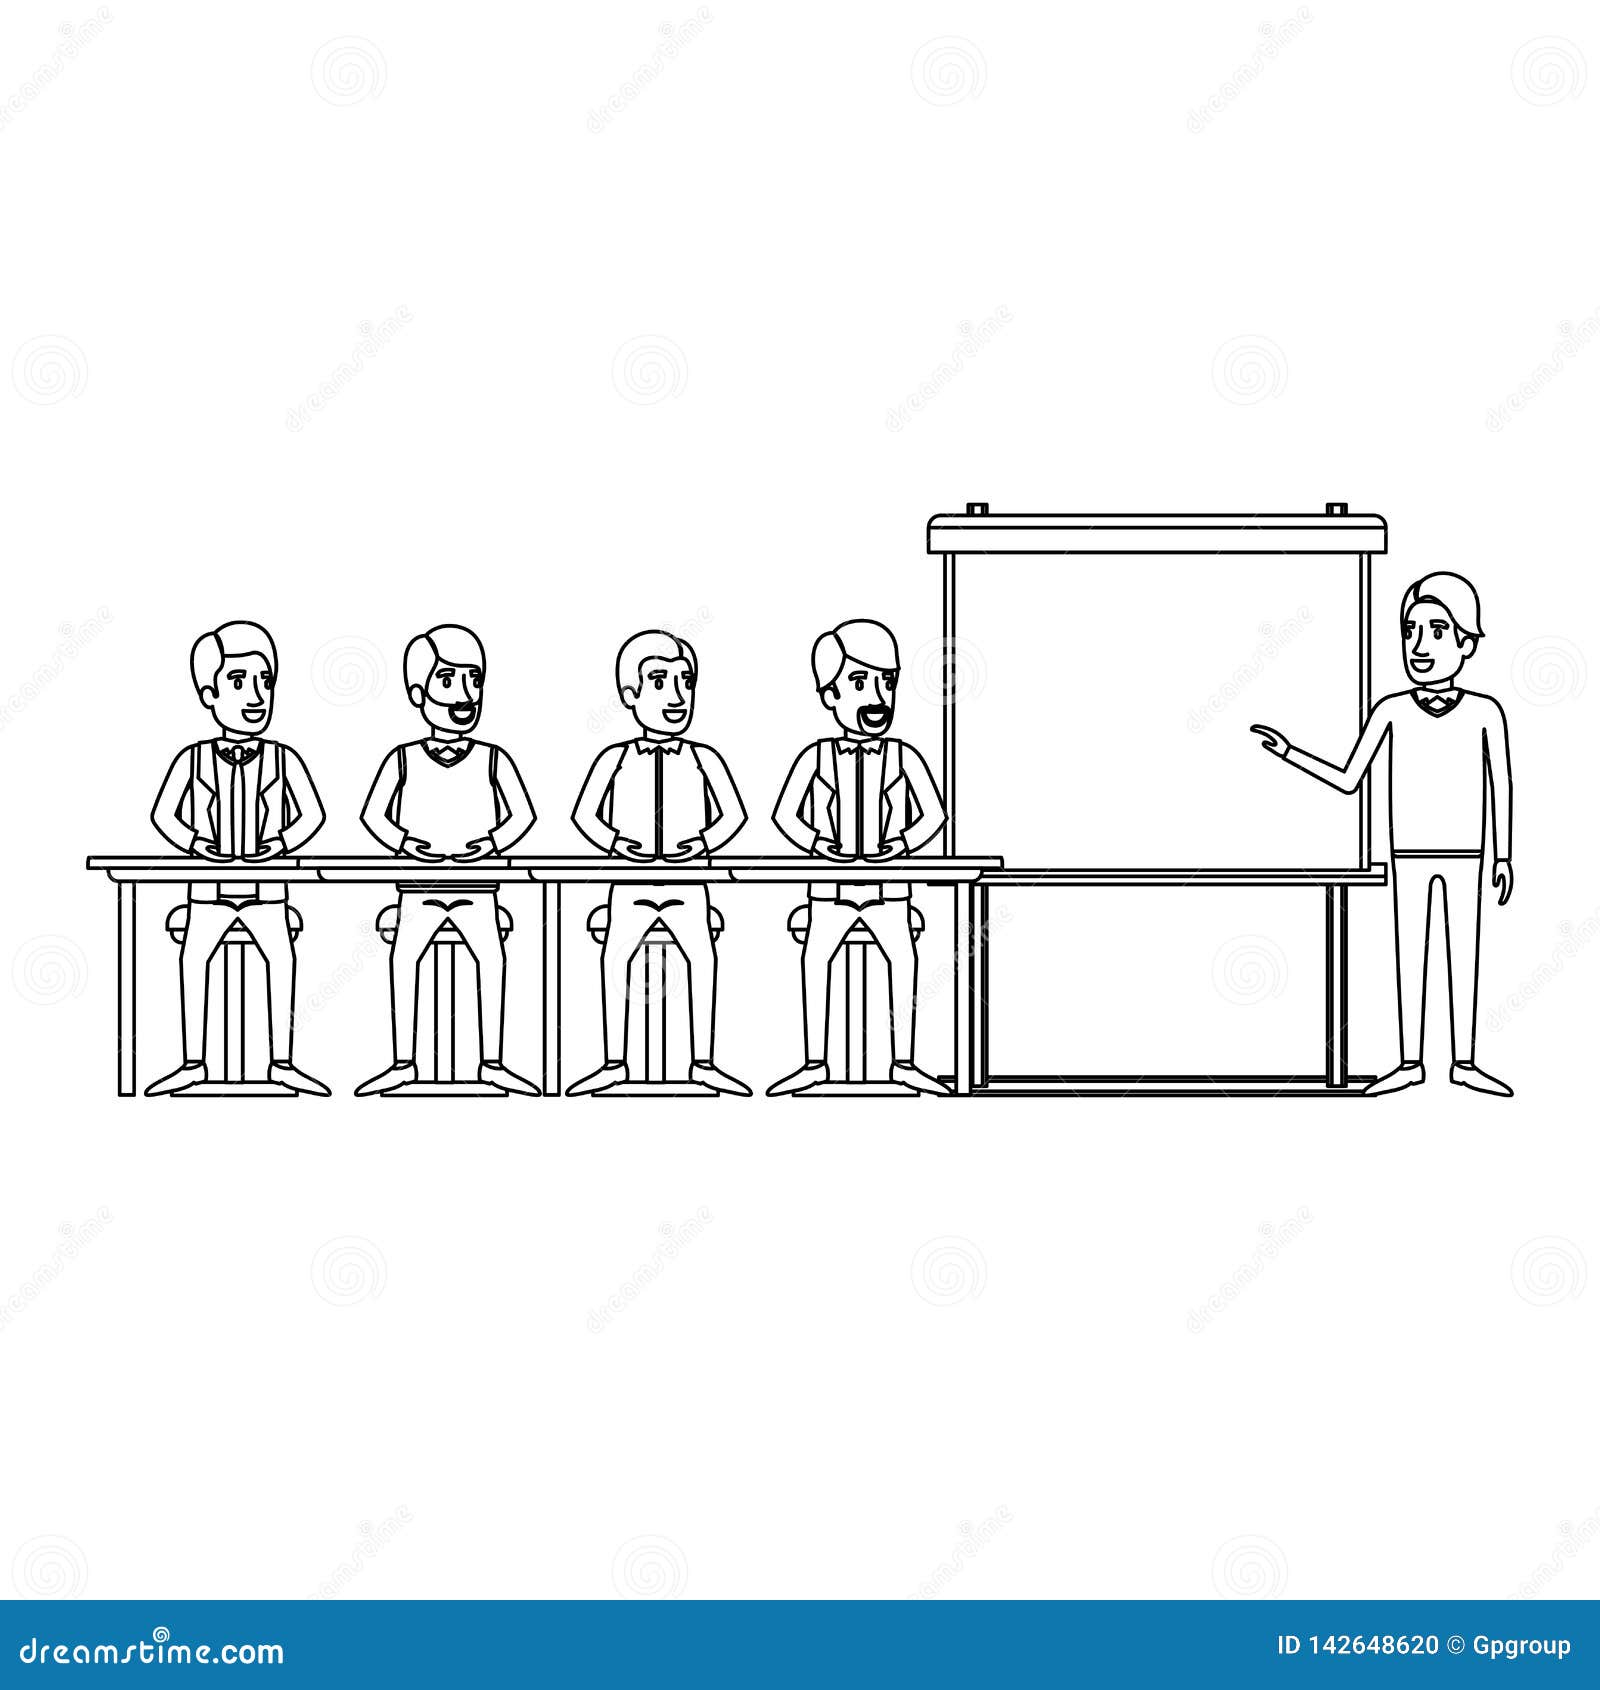 monochrome background with men group sitting in a desk for executive male in presentacion business people